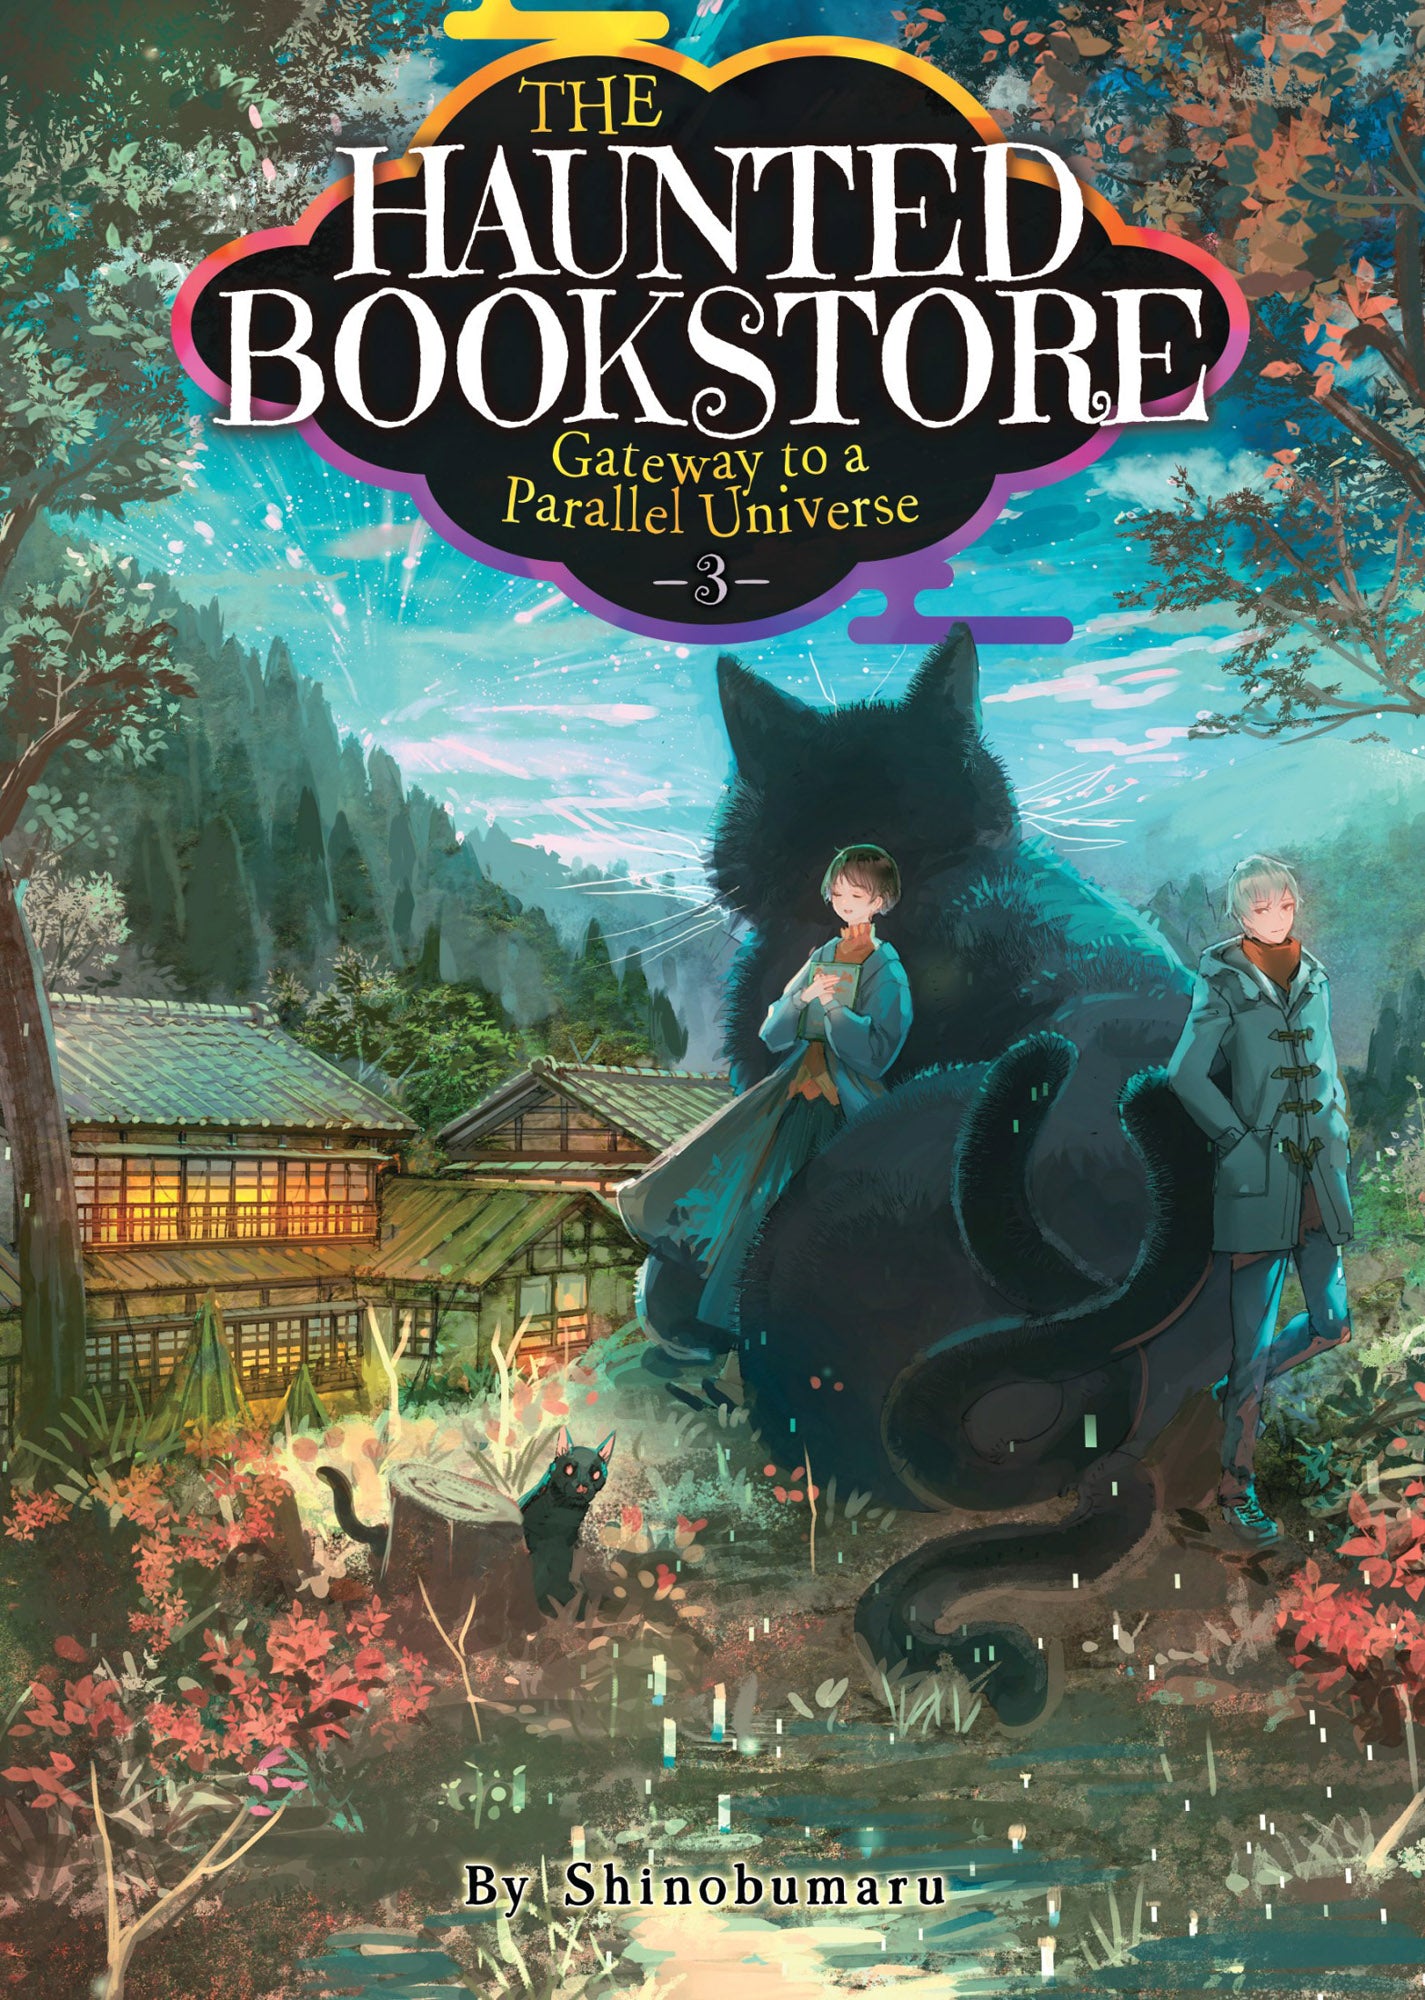 The Haunted Bookstore - Gateway to a Parallel Universe (Light Novel) Vol. 03